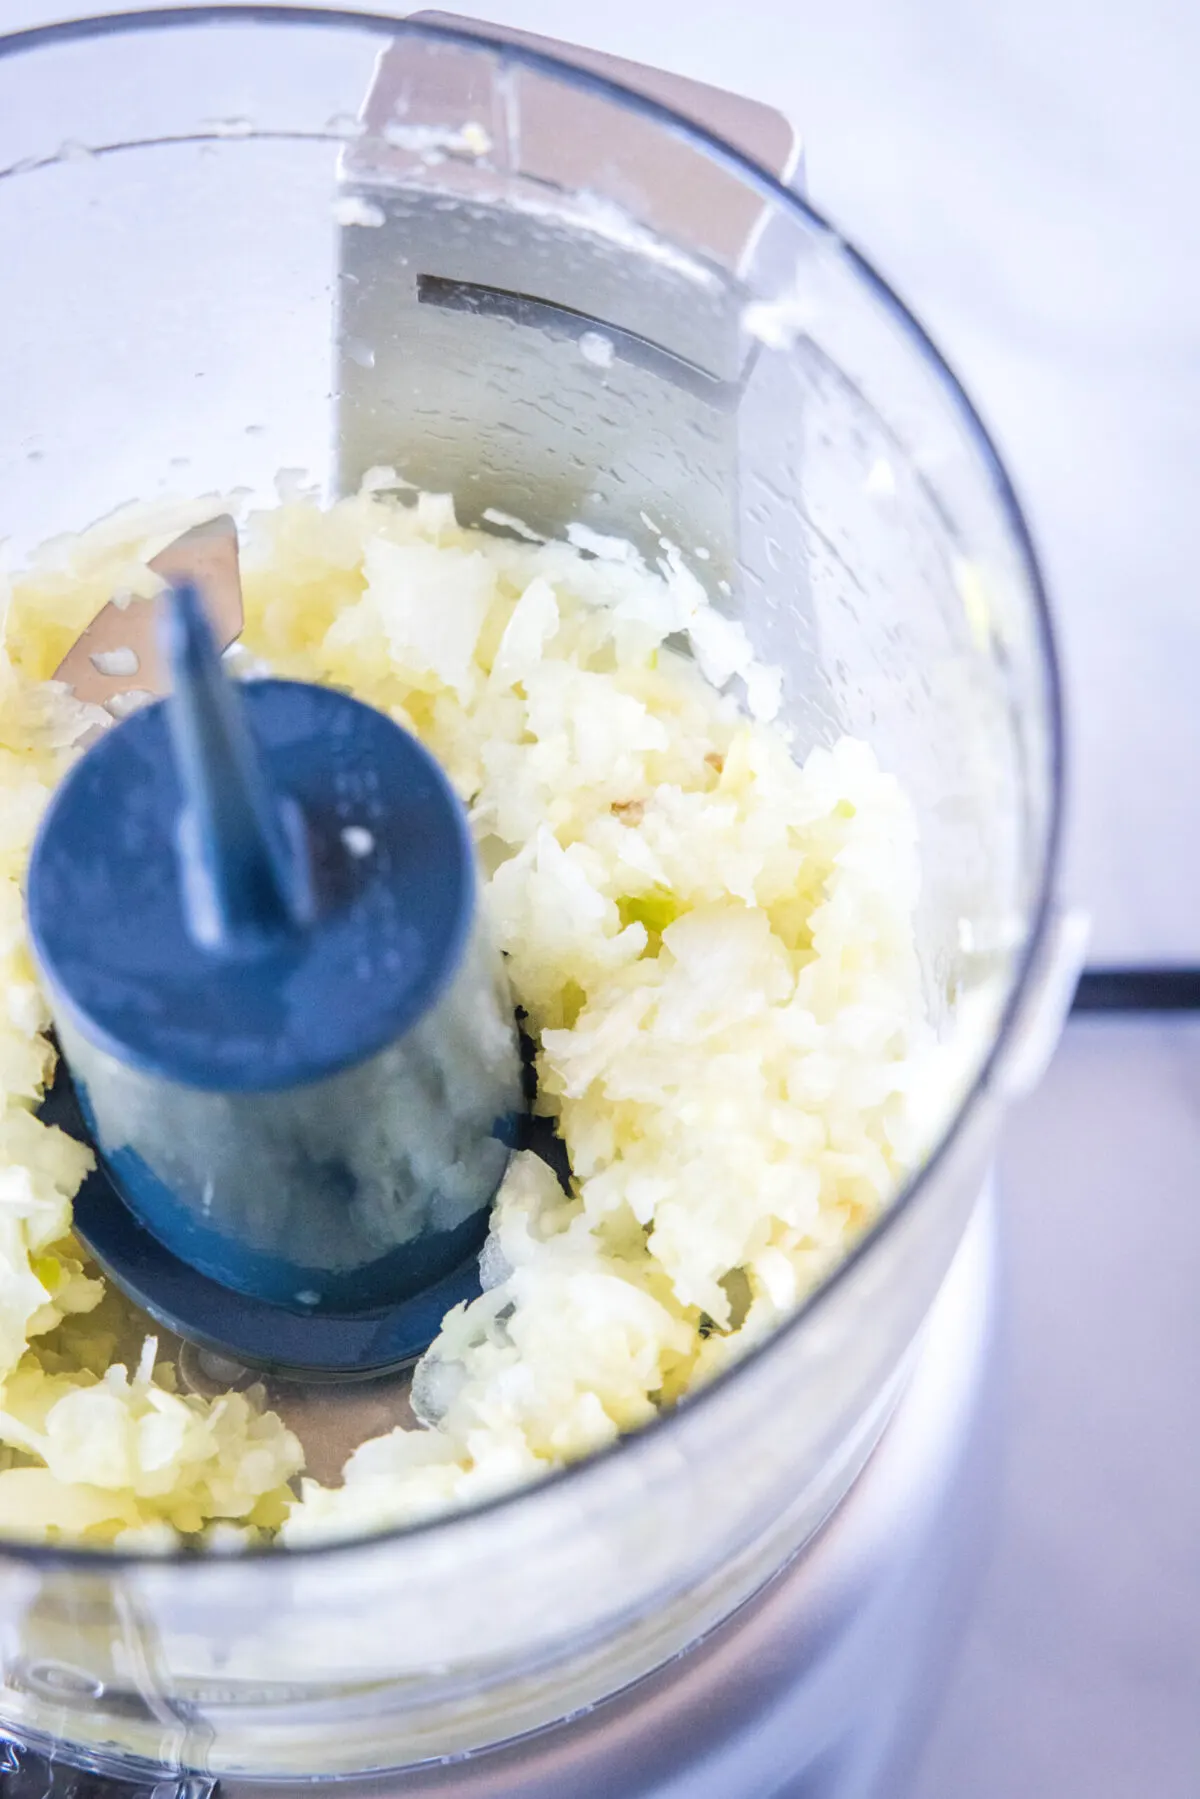 Minced onions, garlic, and ginger in a food processor